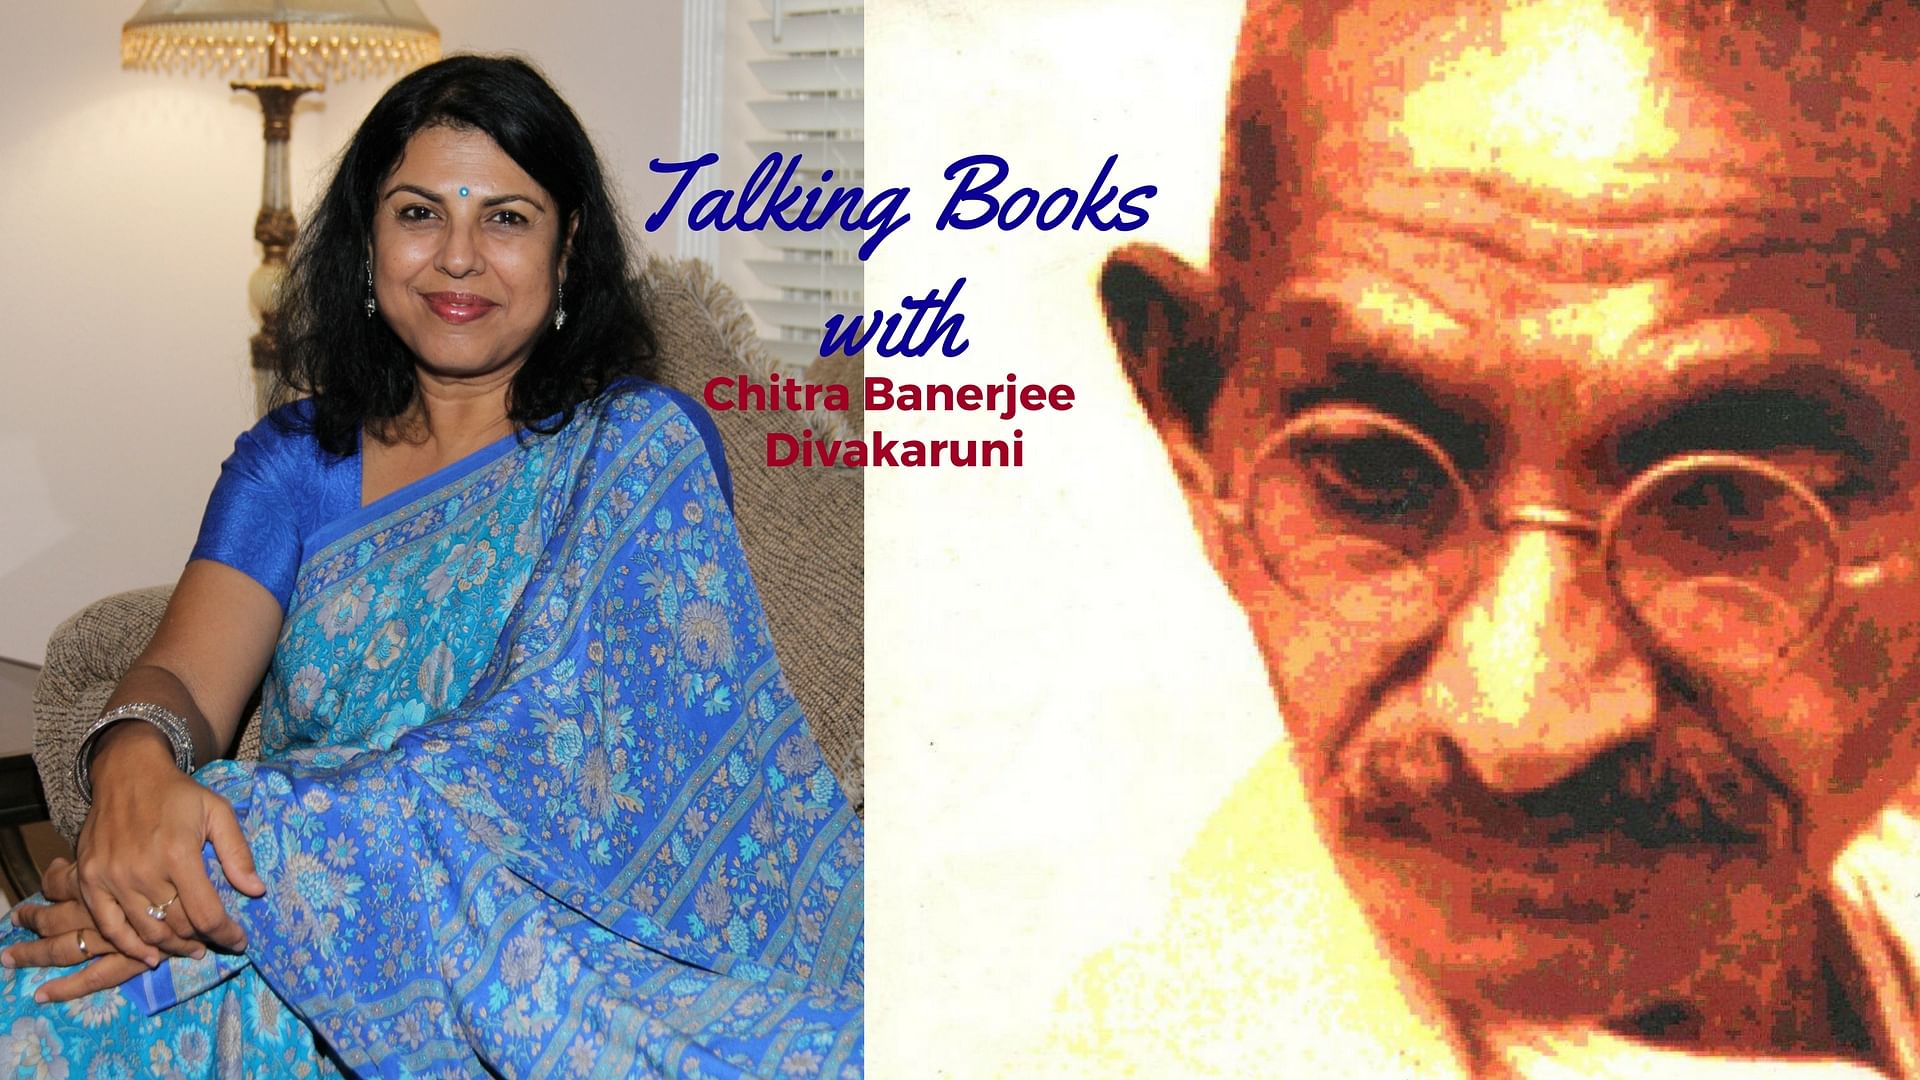 Chitra Banerjee Divakaruni feels Gandhi’s <i>My Experiments With Truth</i> should be a must-read in India today.